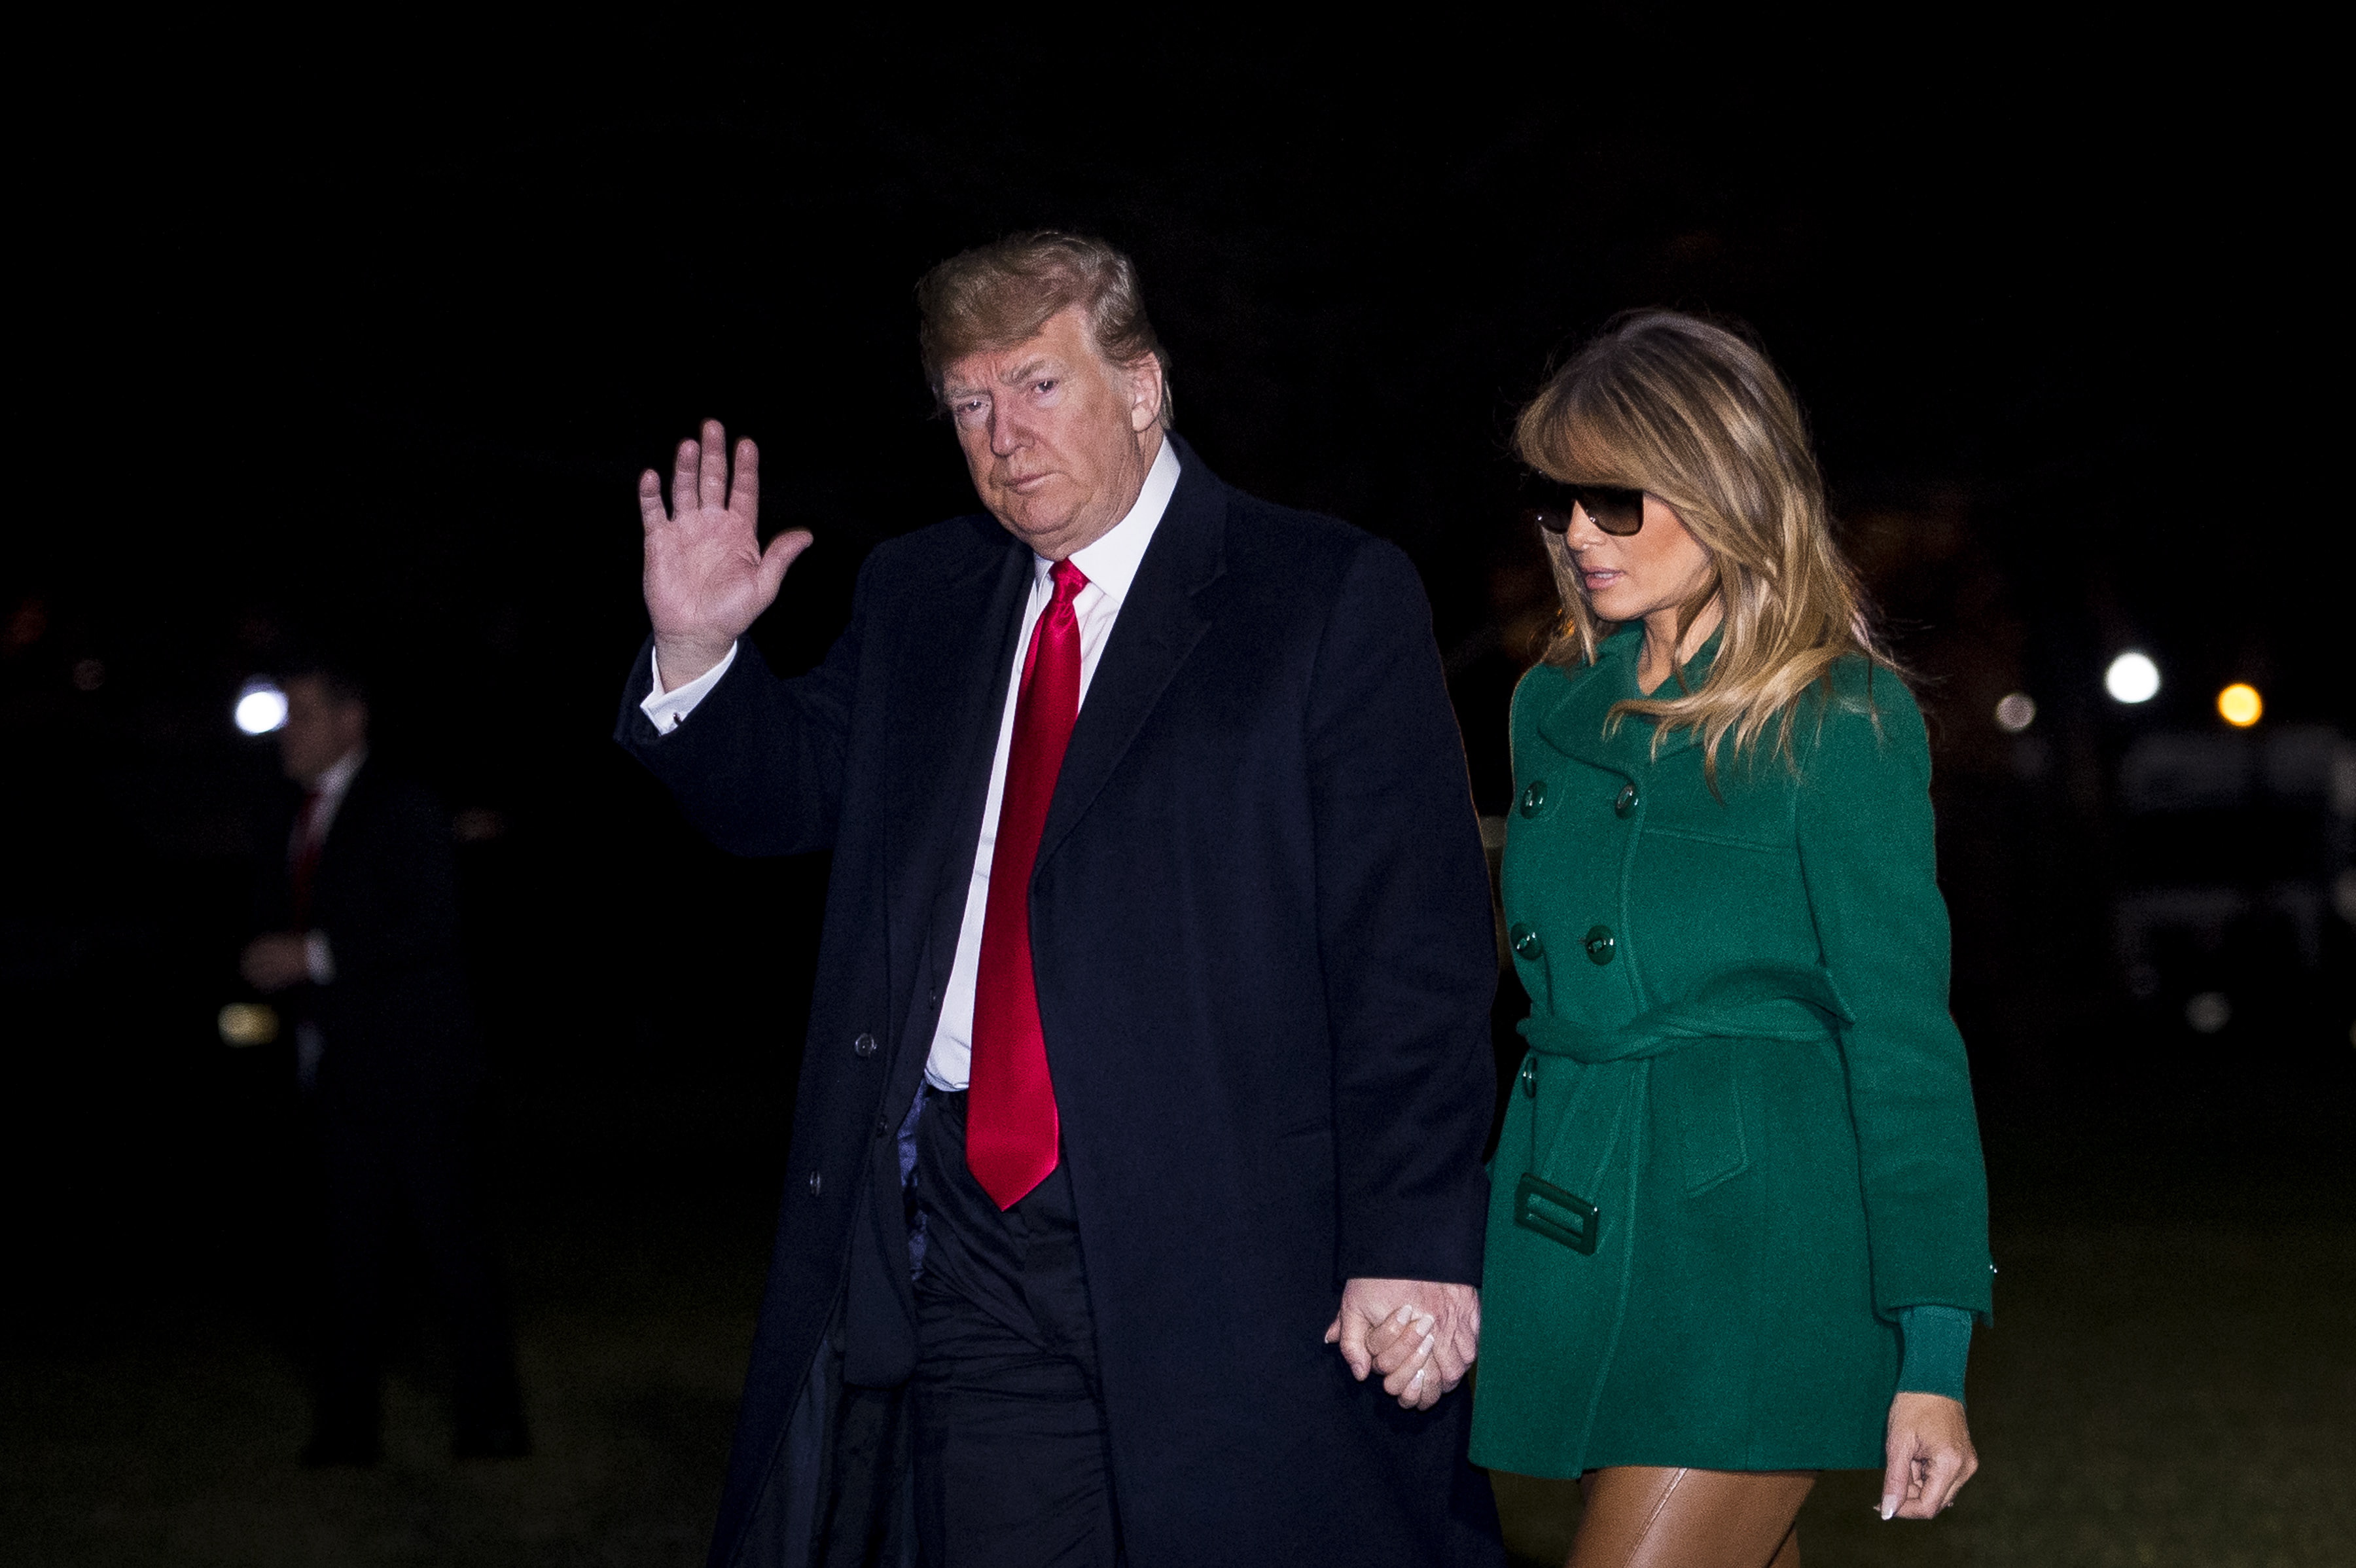 epa07250164 US President Donald J. Trump (L) and First Lady Melania Trump make their way across the South Lawn of the White House after returning on Marine One from their surprise trip to Al Asad Air Base in Iraq to visit troops, in Washington, DC, USA, 27 December 2018.  EPA/PETE MAROVICH